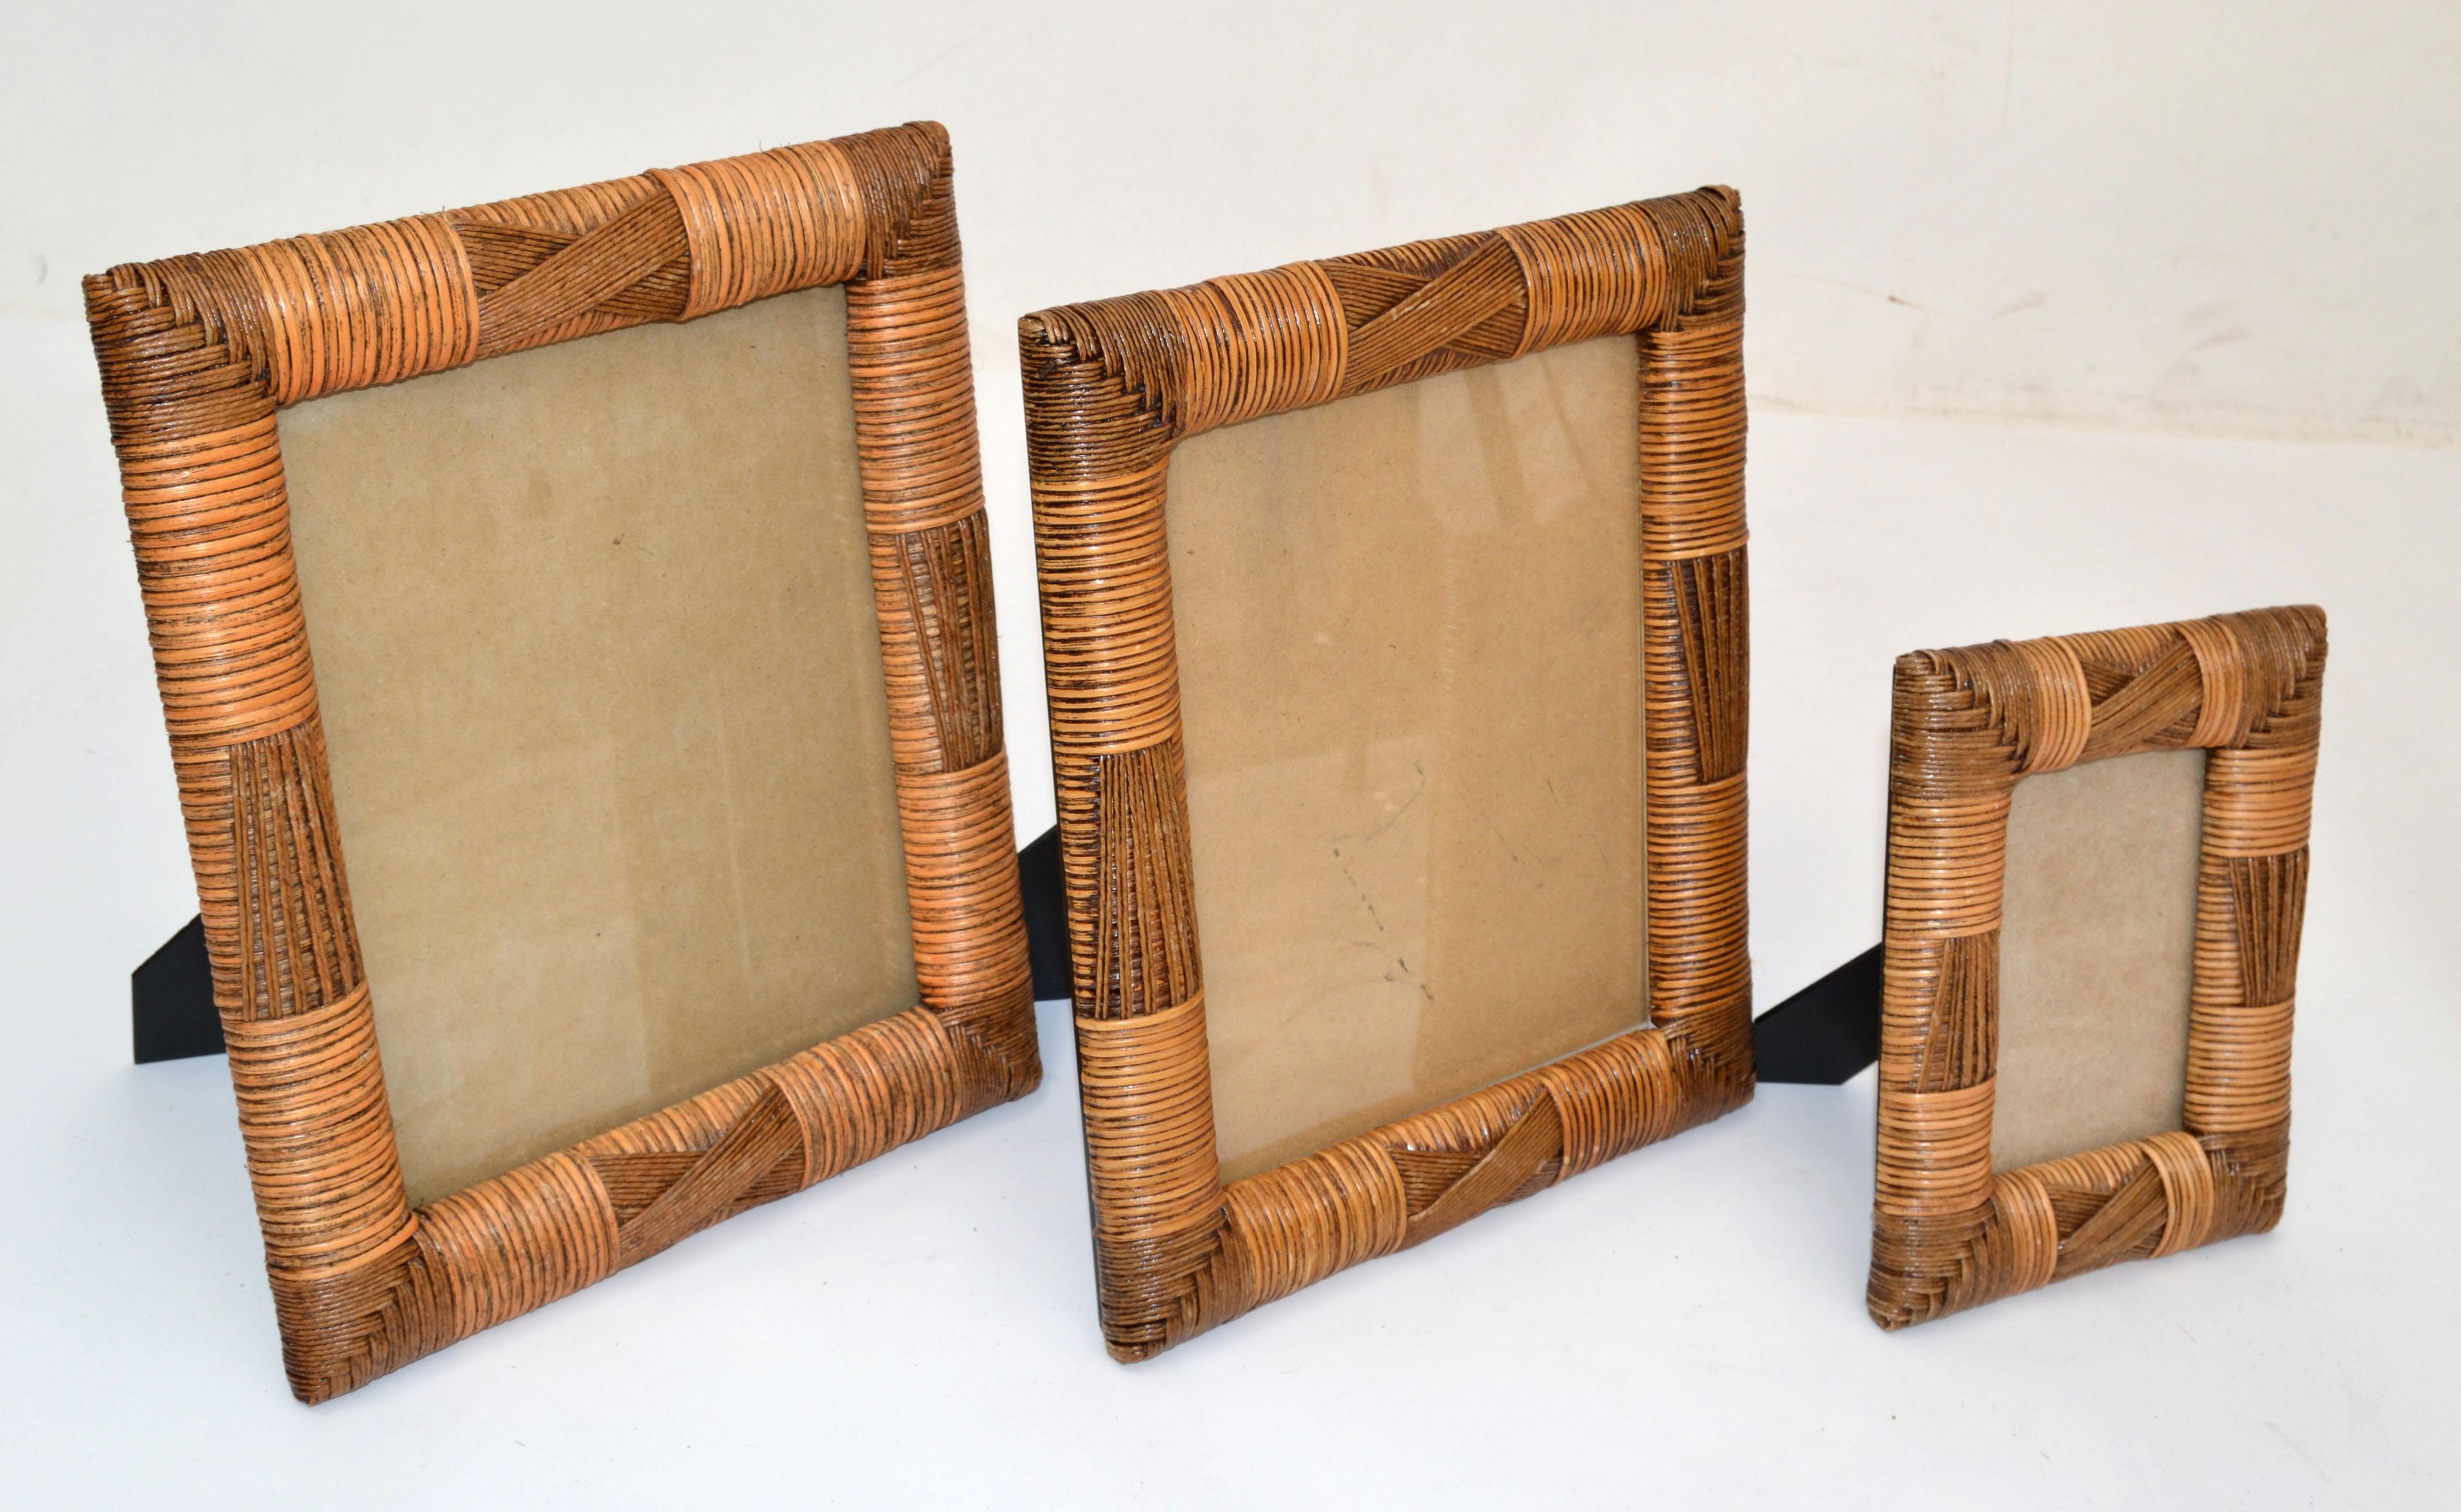 Set of 3 handcrafted Bohemian Chic picture frames made out of wicker, cane & wood.
Bigger Frames hold an image up to 7.5 x 9 inches
Smaller Frame holds an image up to 3.5 x 5 inches.
Measurement smaller Picture Frame: 
Height 9 x 7 x 1 inches.